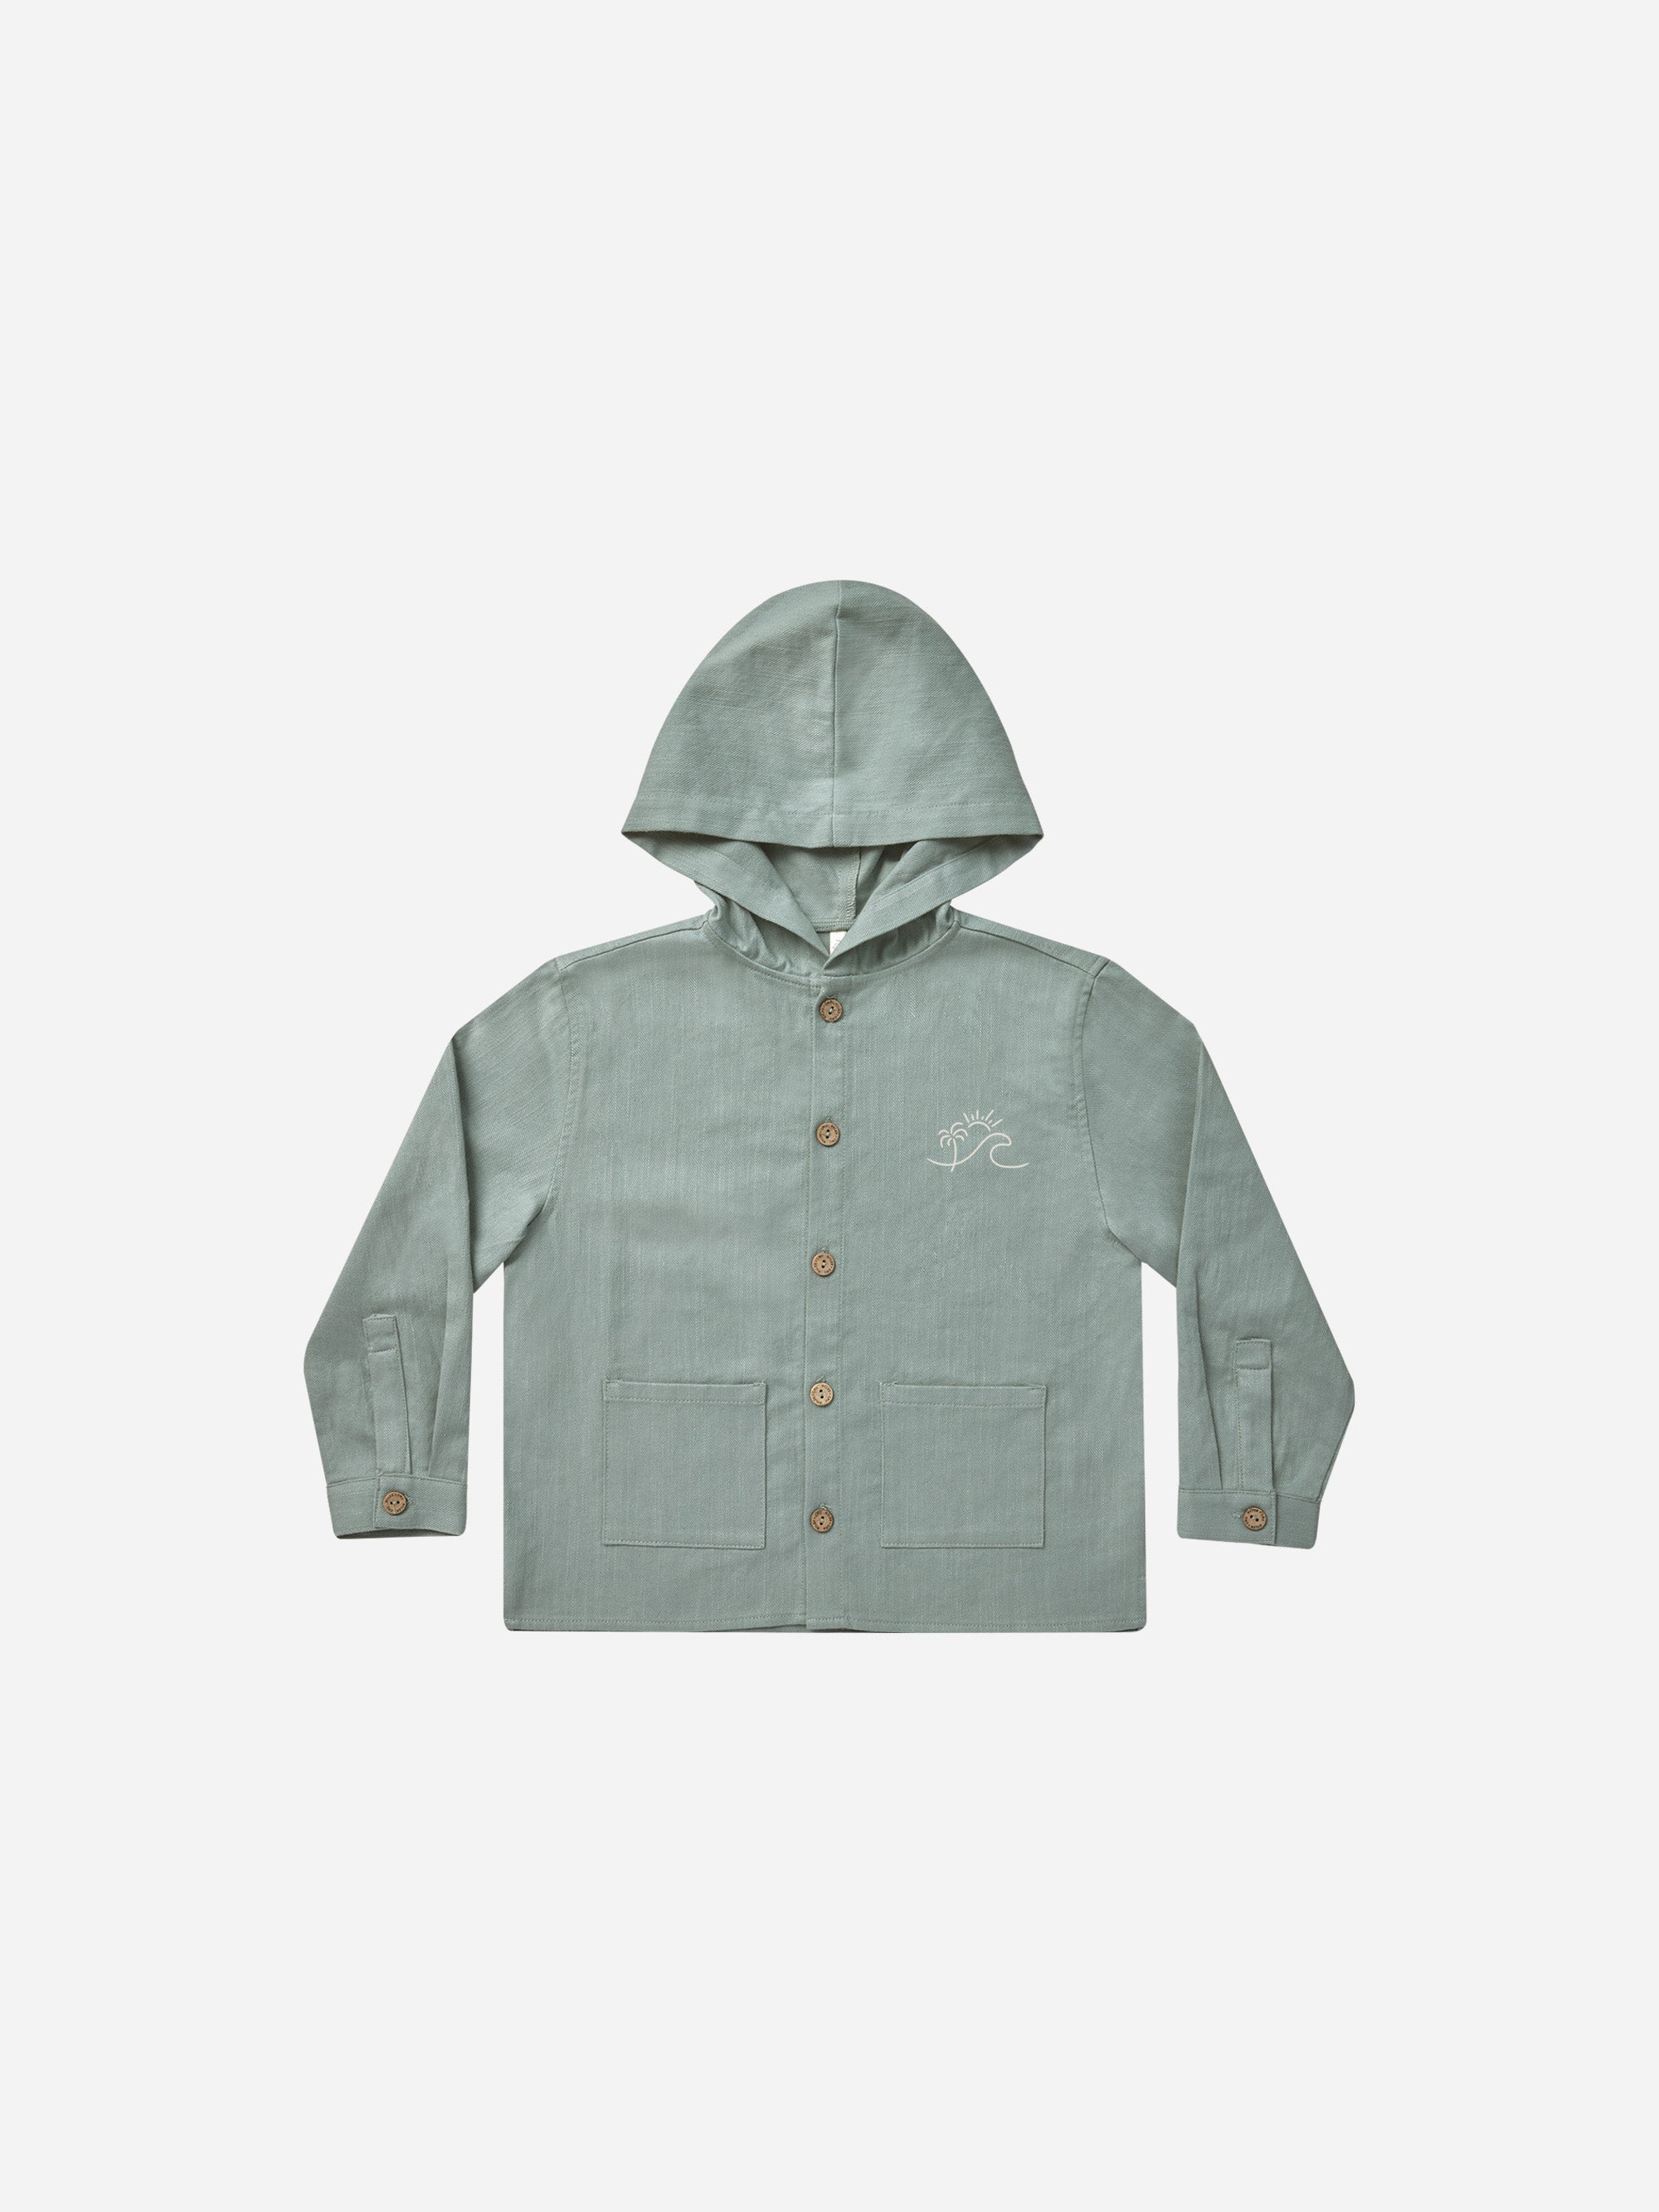 Hooded Overshirt || Aqua - Rylee + Cru | Kids Clothes | Trendy Baby Clothes | Modern Infant Outfits |